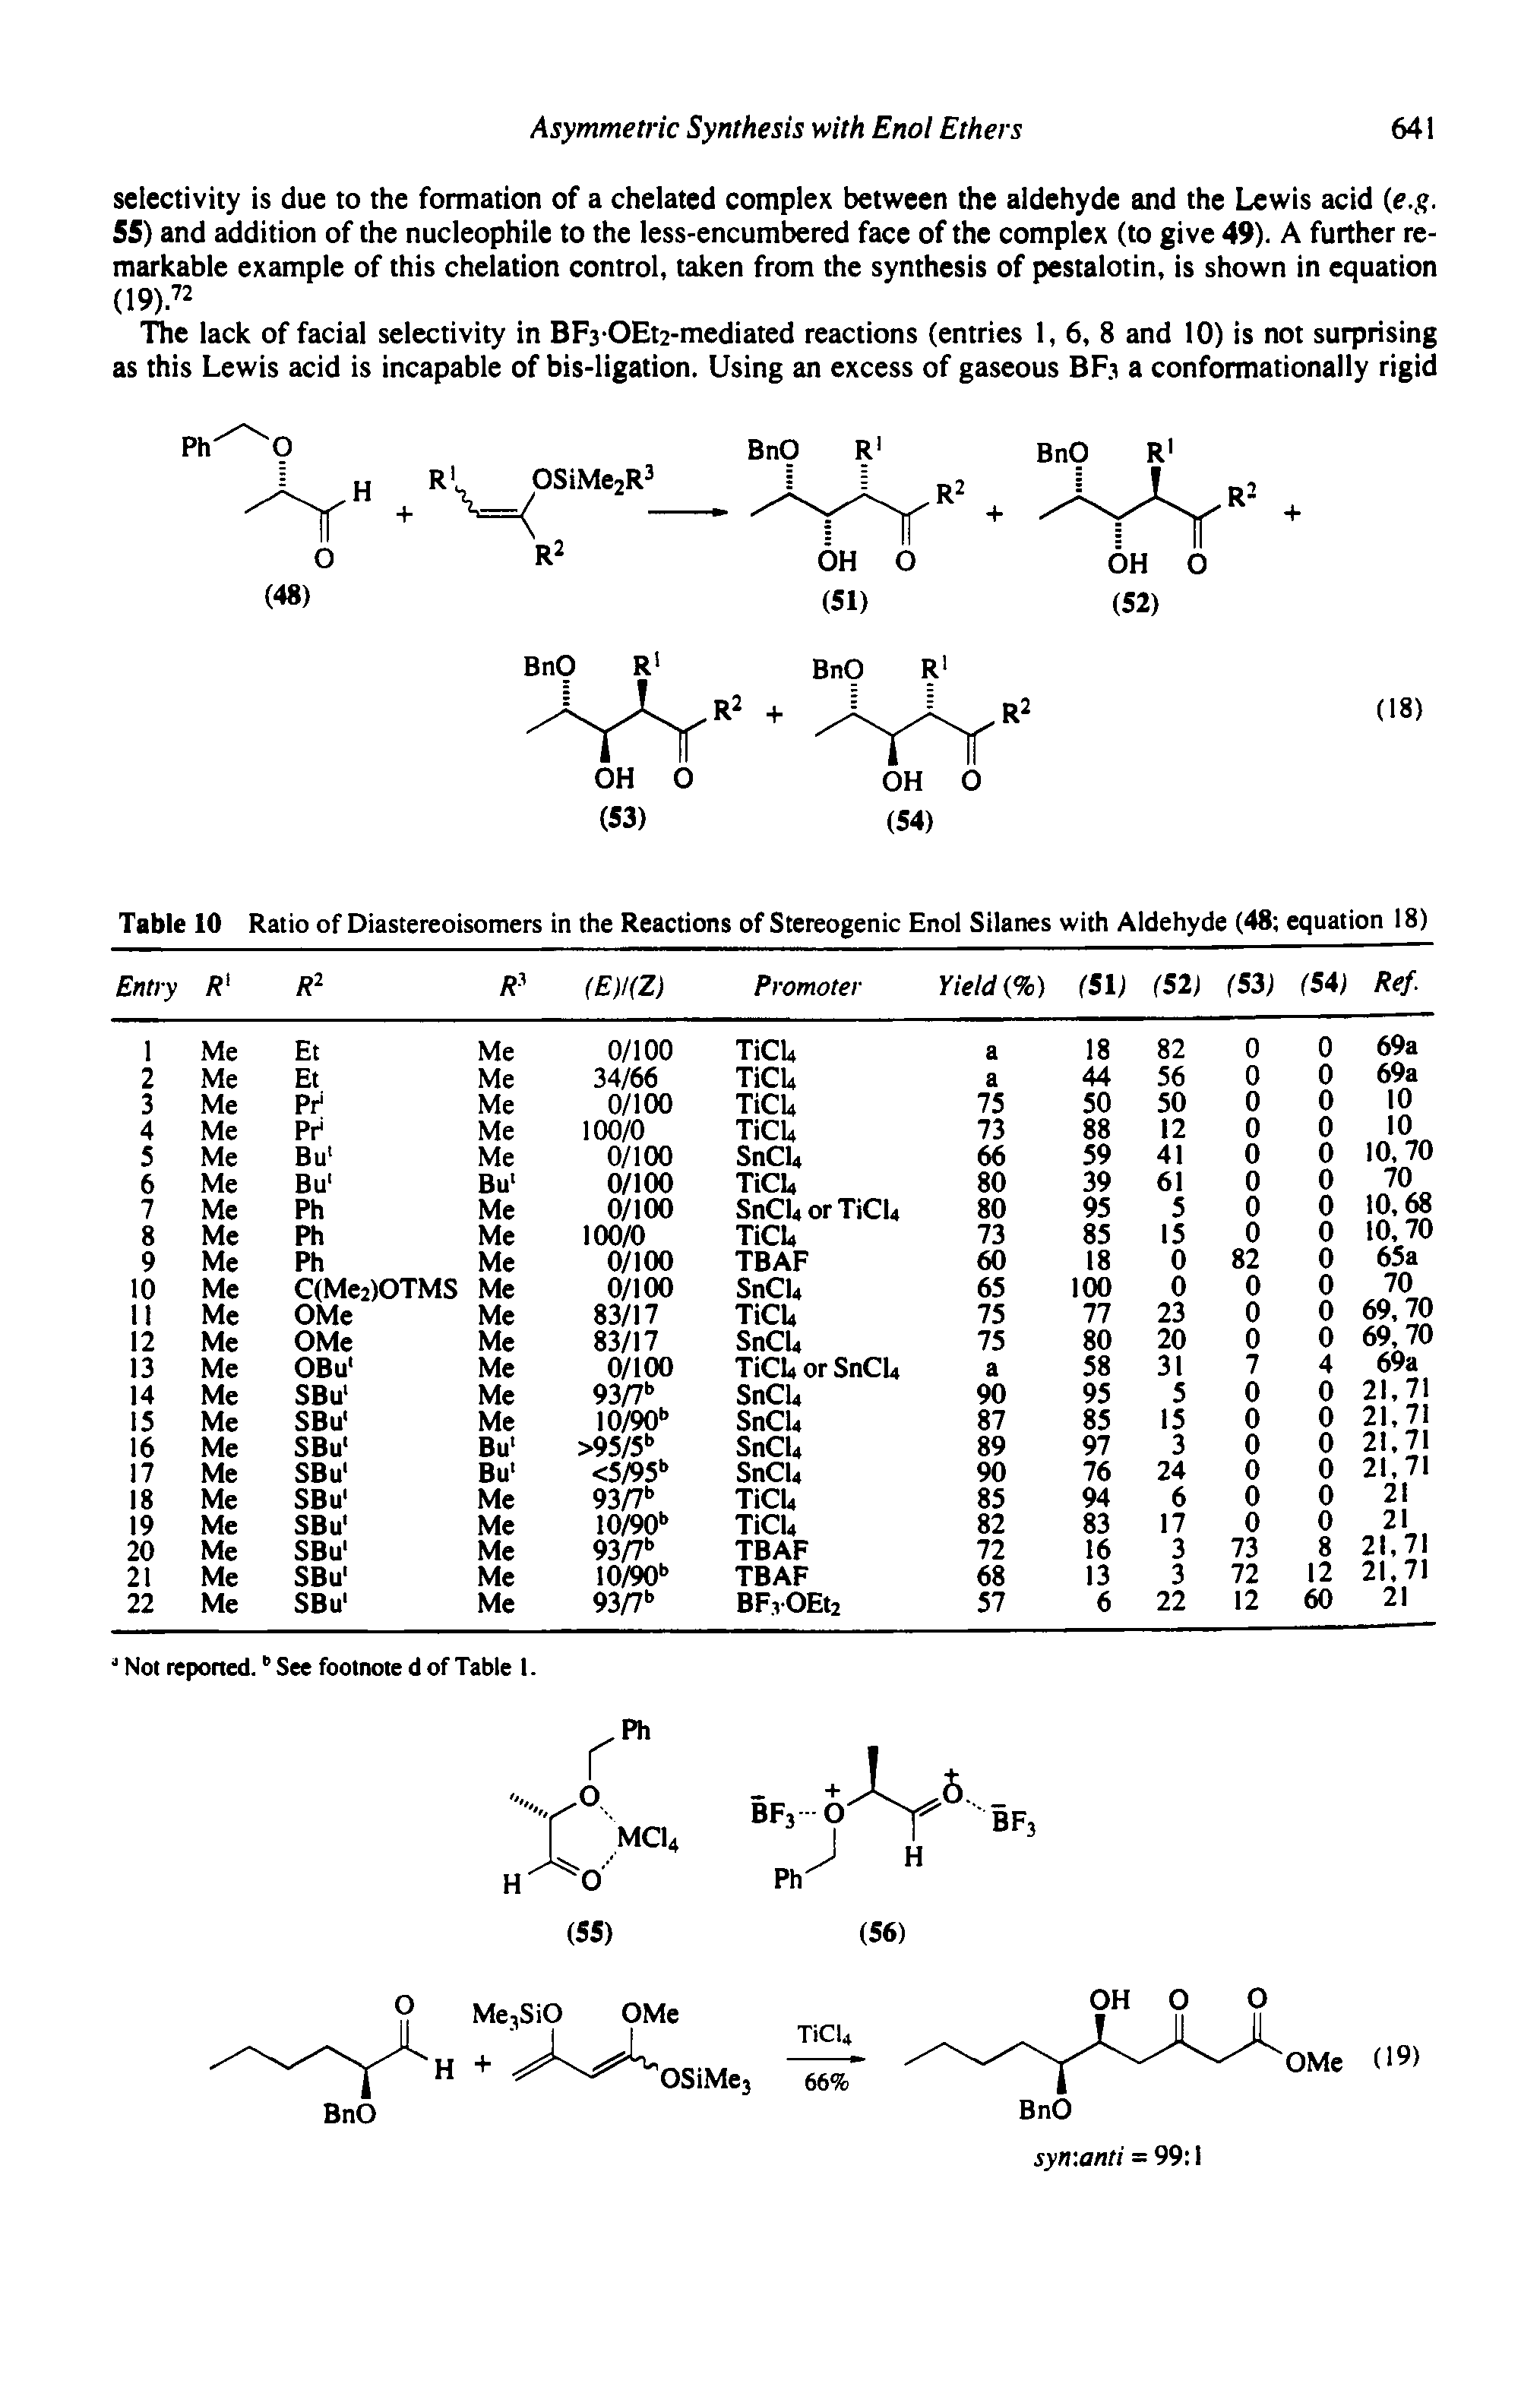 Table 10 Ratio of Diastereoisomers in the Reactions of Stereogenic Enol Silanes with Aldehyde (48 equation 18)...